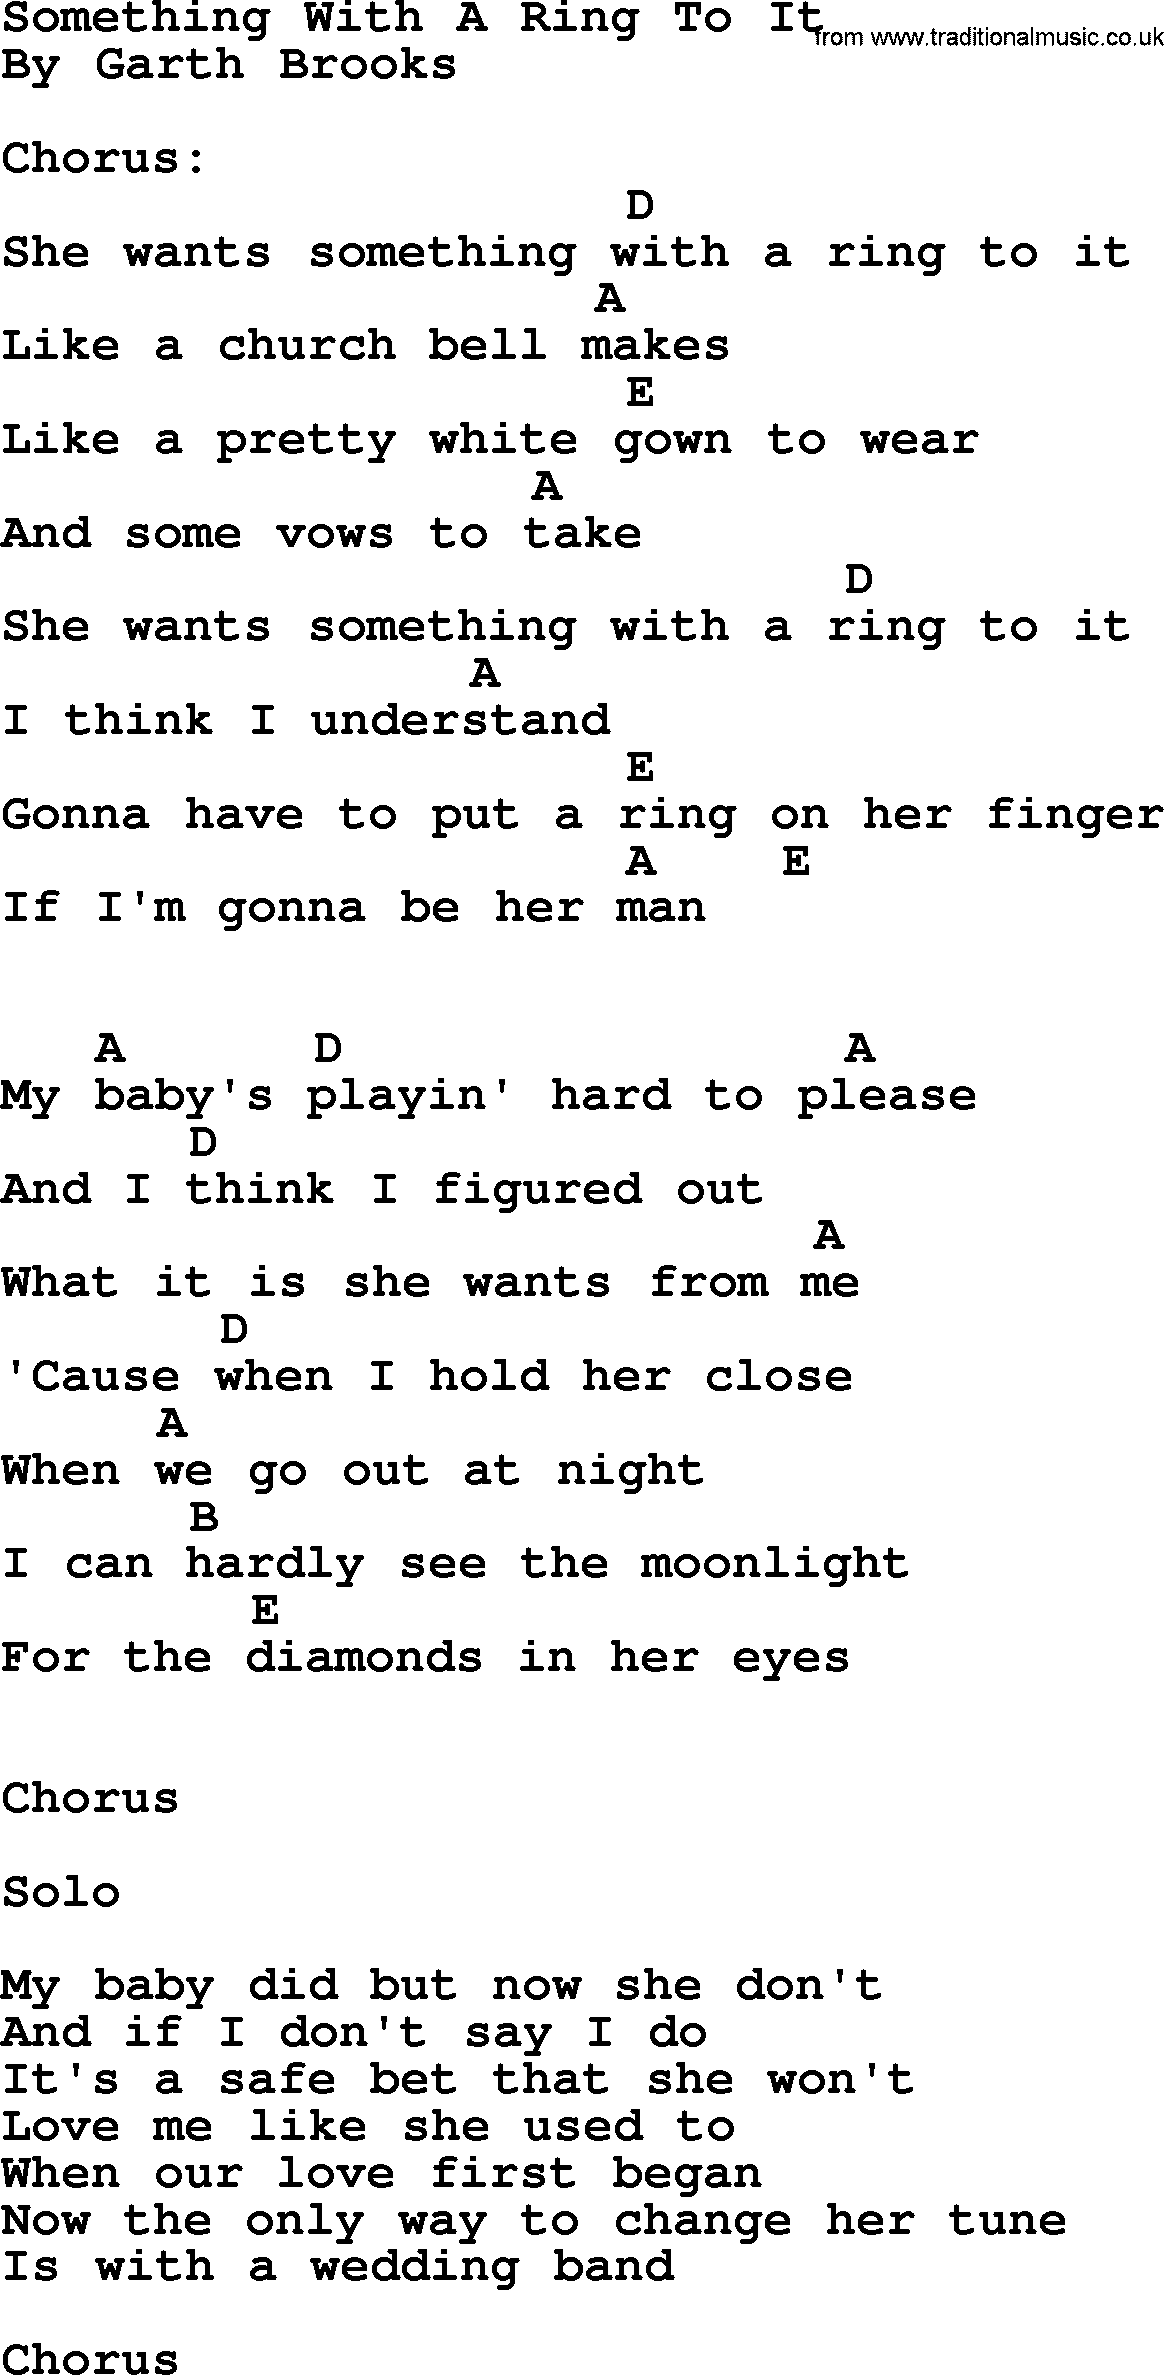 Garth Brooks song: Something With A Ring To It, lyrics and chords